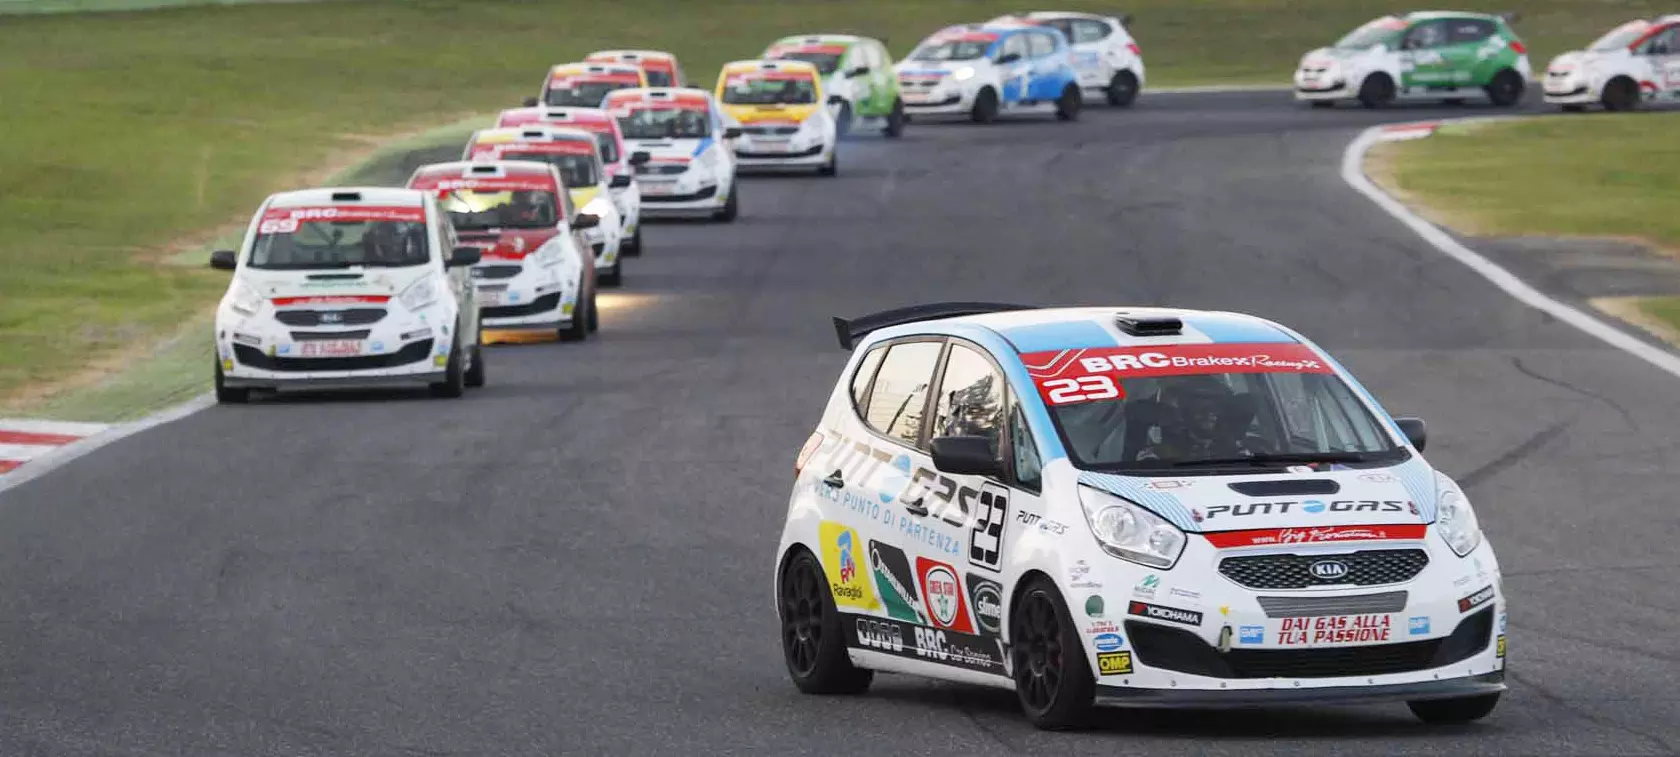 Green Hybrid Cup 2015 na torze Vallelunga